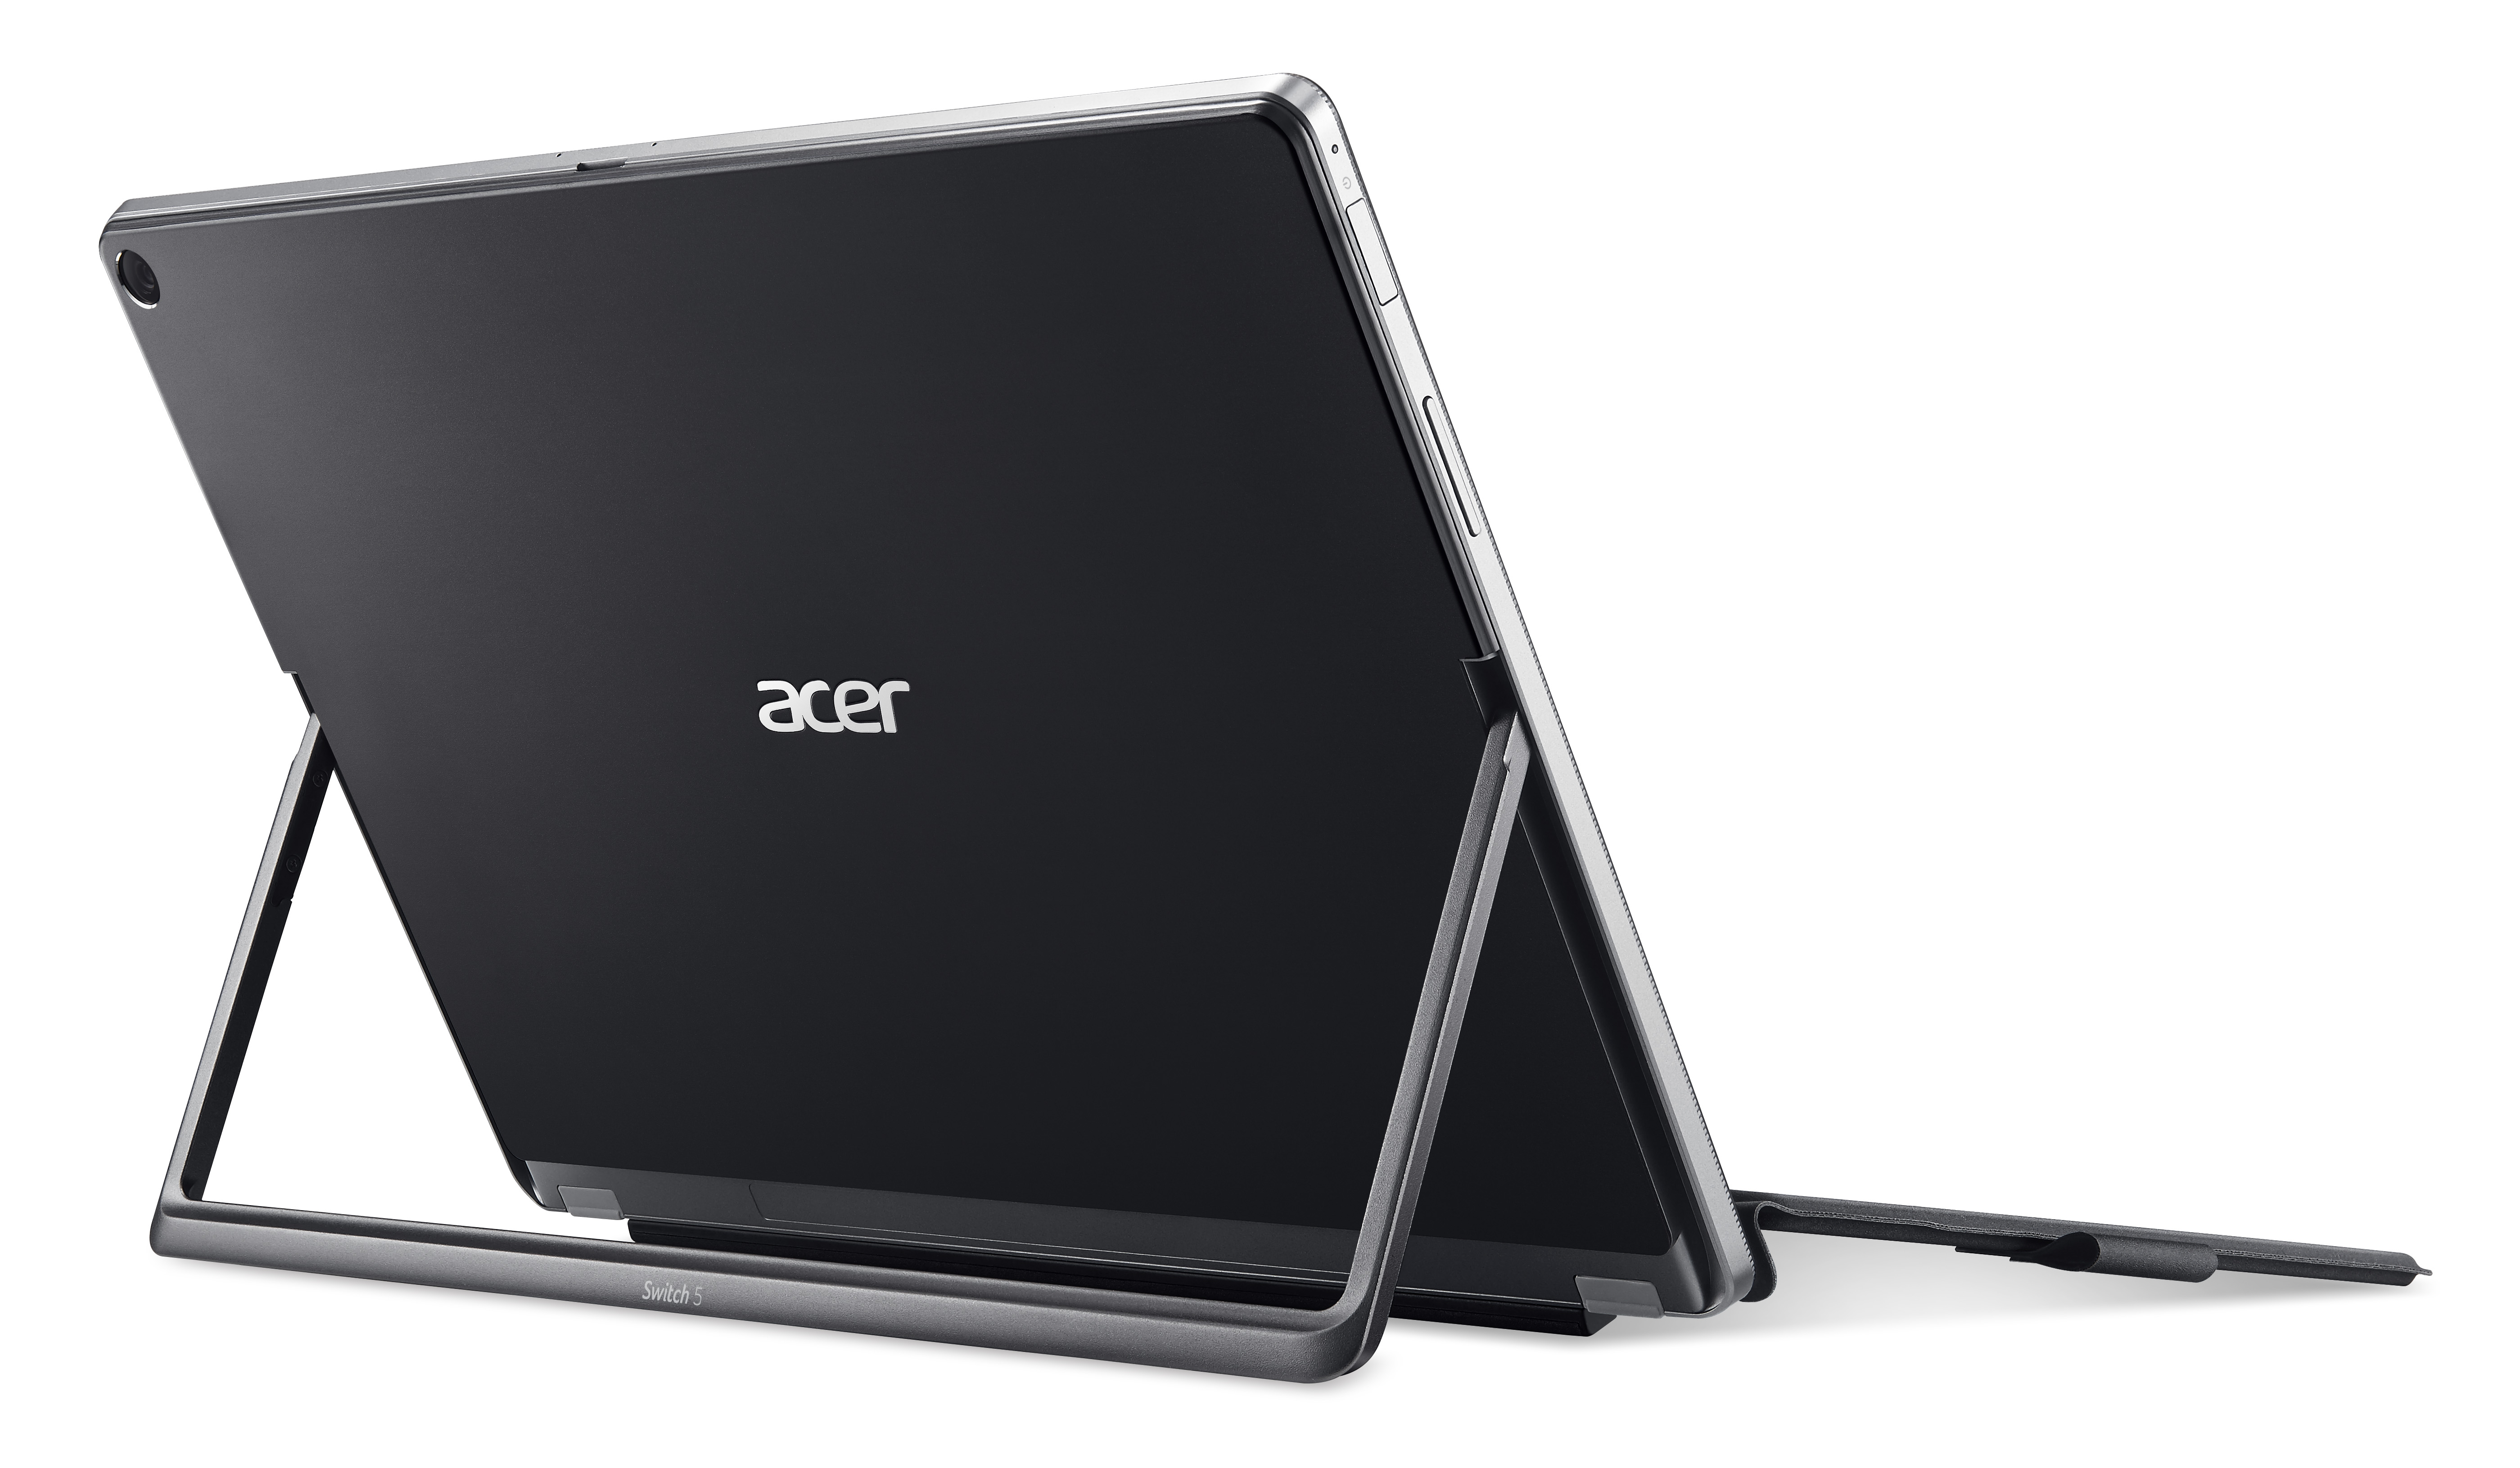 The Acer Switch 5 with Windows 10